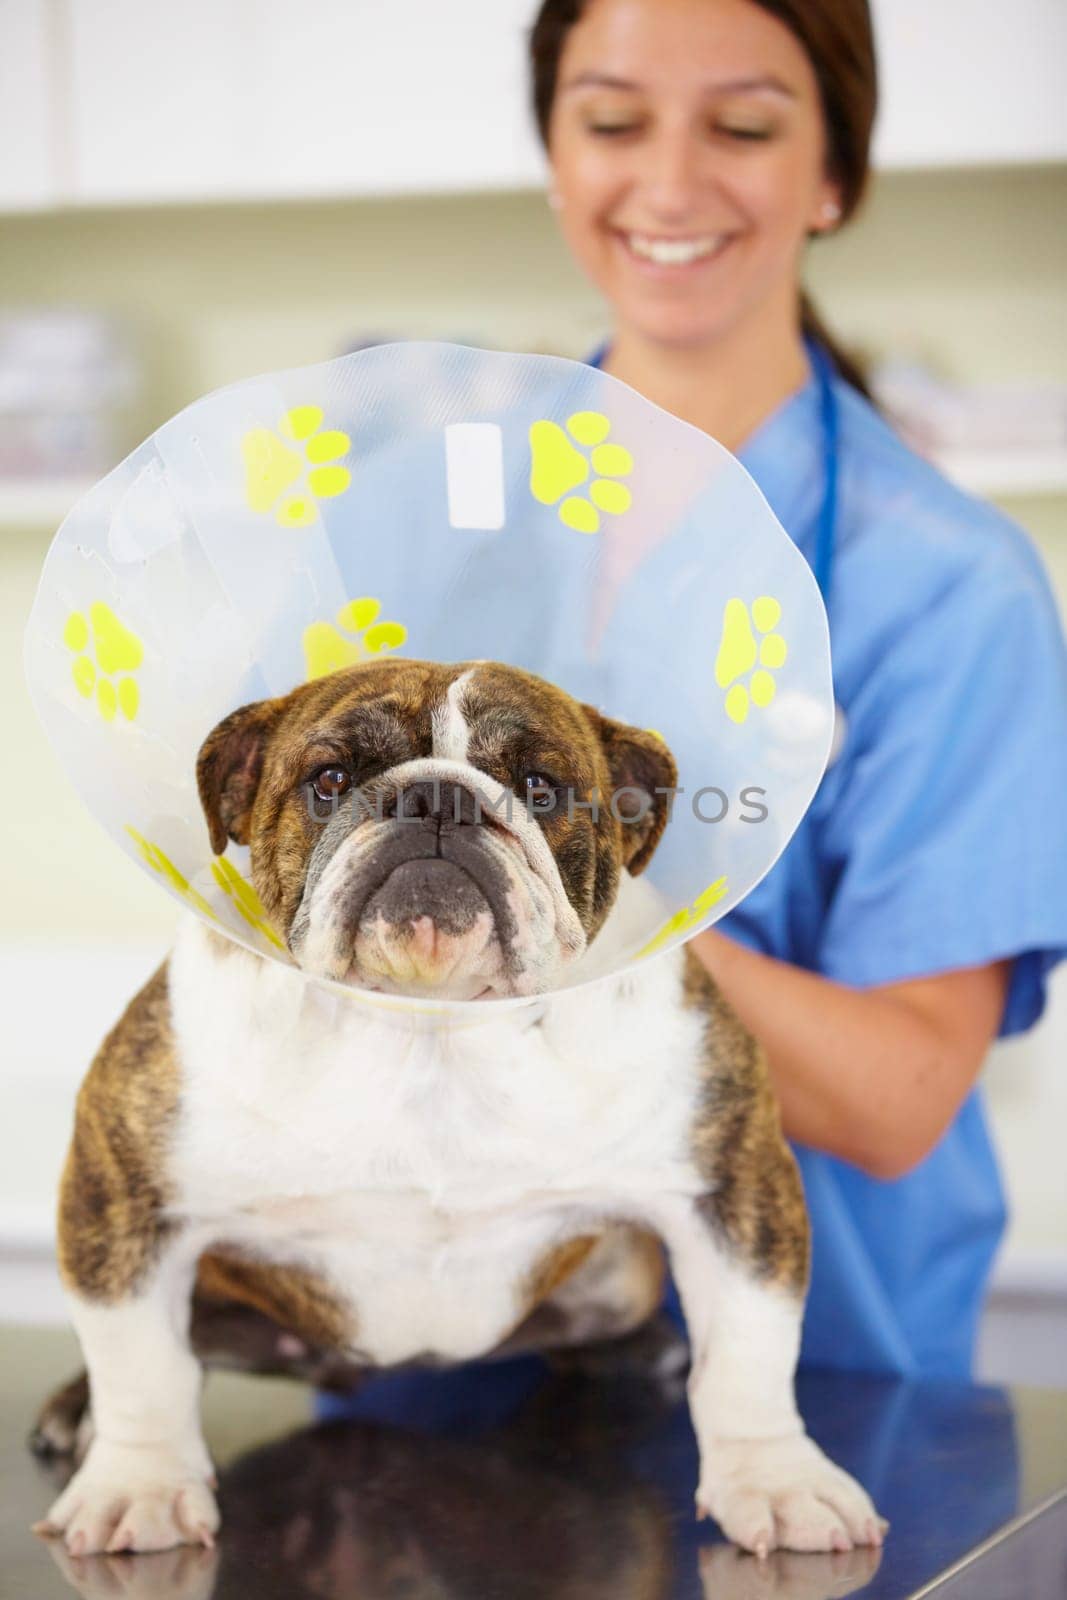 Cone, face or dog at vet or animal healthcare check up in nursing consultation or clinic inspection. Collar, doctor or sick bulldog pet or puppy in examination or medical test for veterinary help.